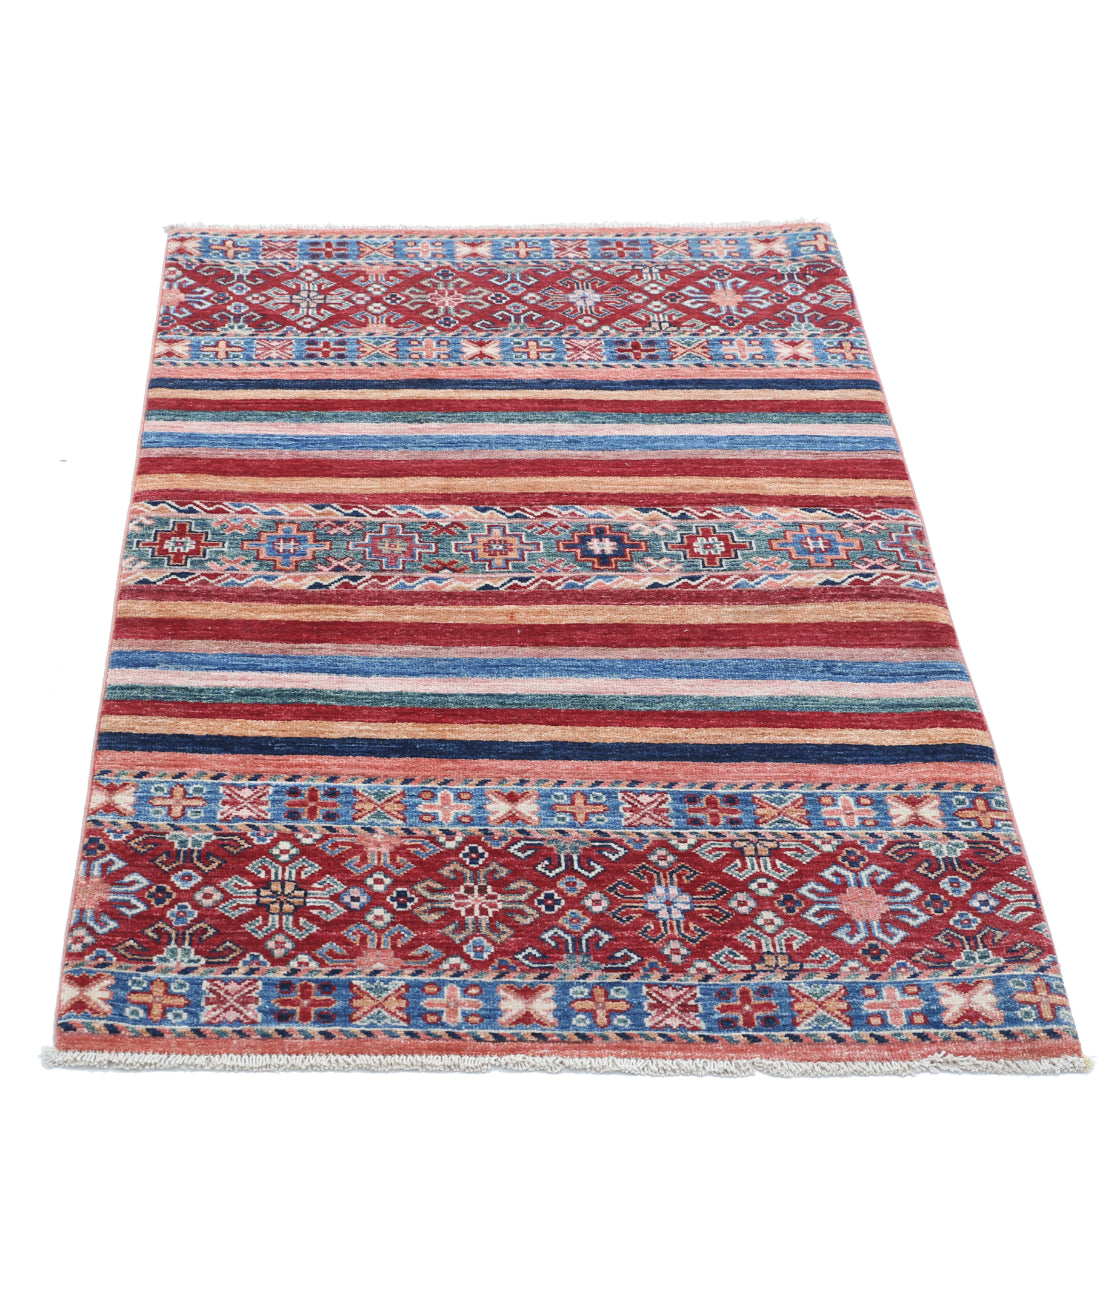 Hand Knotted Khurjeen Wool Rug - 2'9'' x 4'1'' 2'9'' x 4'1'' (83 X 123) / Multi / Multi